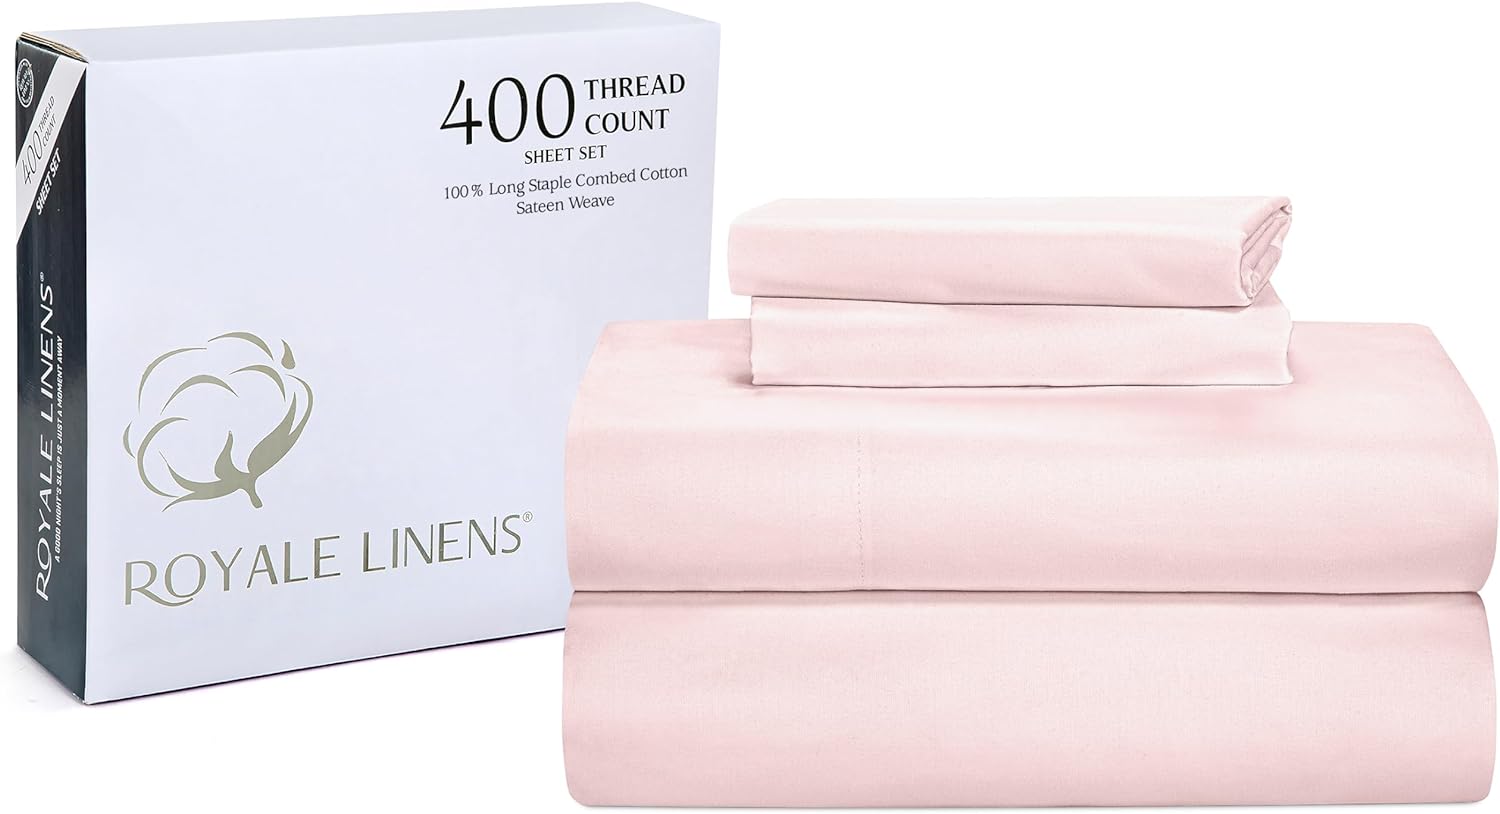 ROYALE LINENS 400 Thread Count 100% American Grown Cotton 4 Piece Sateen Queen Sheet Set - 1 Fitted Sheet, 1 Flat Sheet, 2 Pillow case - Pink Queen Bedsheet - Cotton Sheets - (Queen, Kyoto Blush)